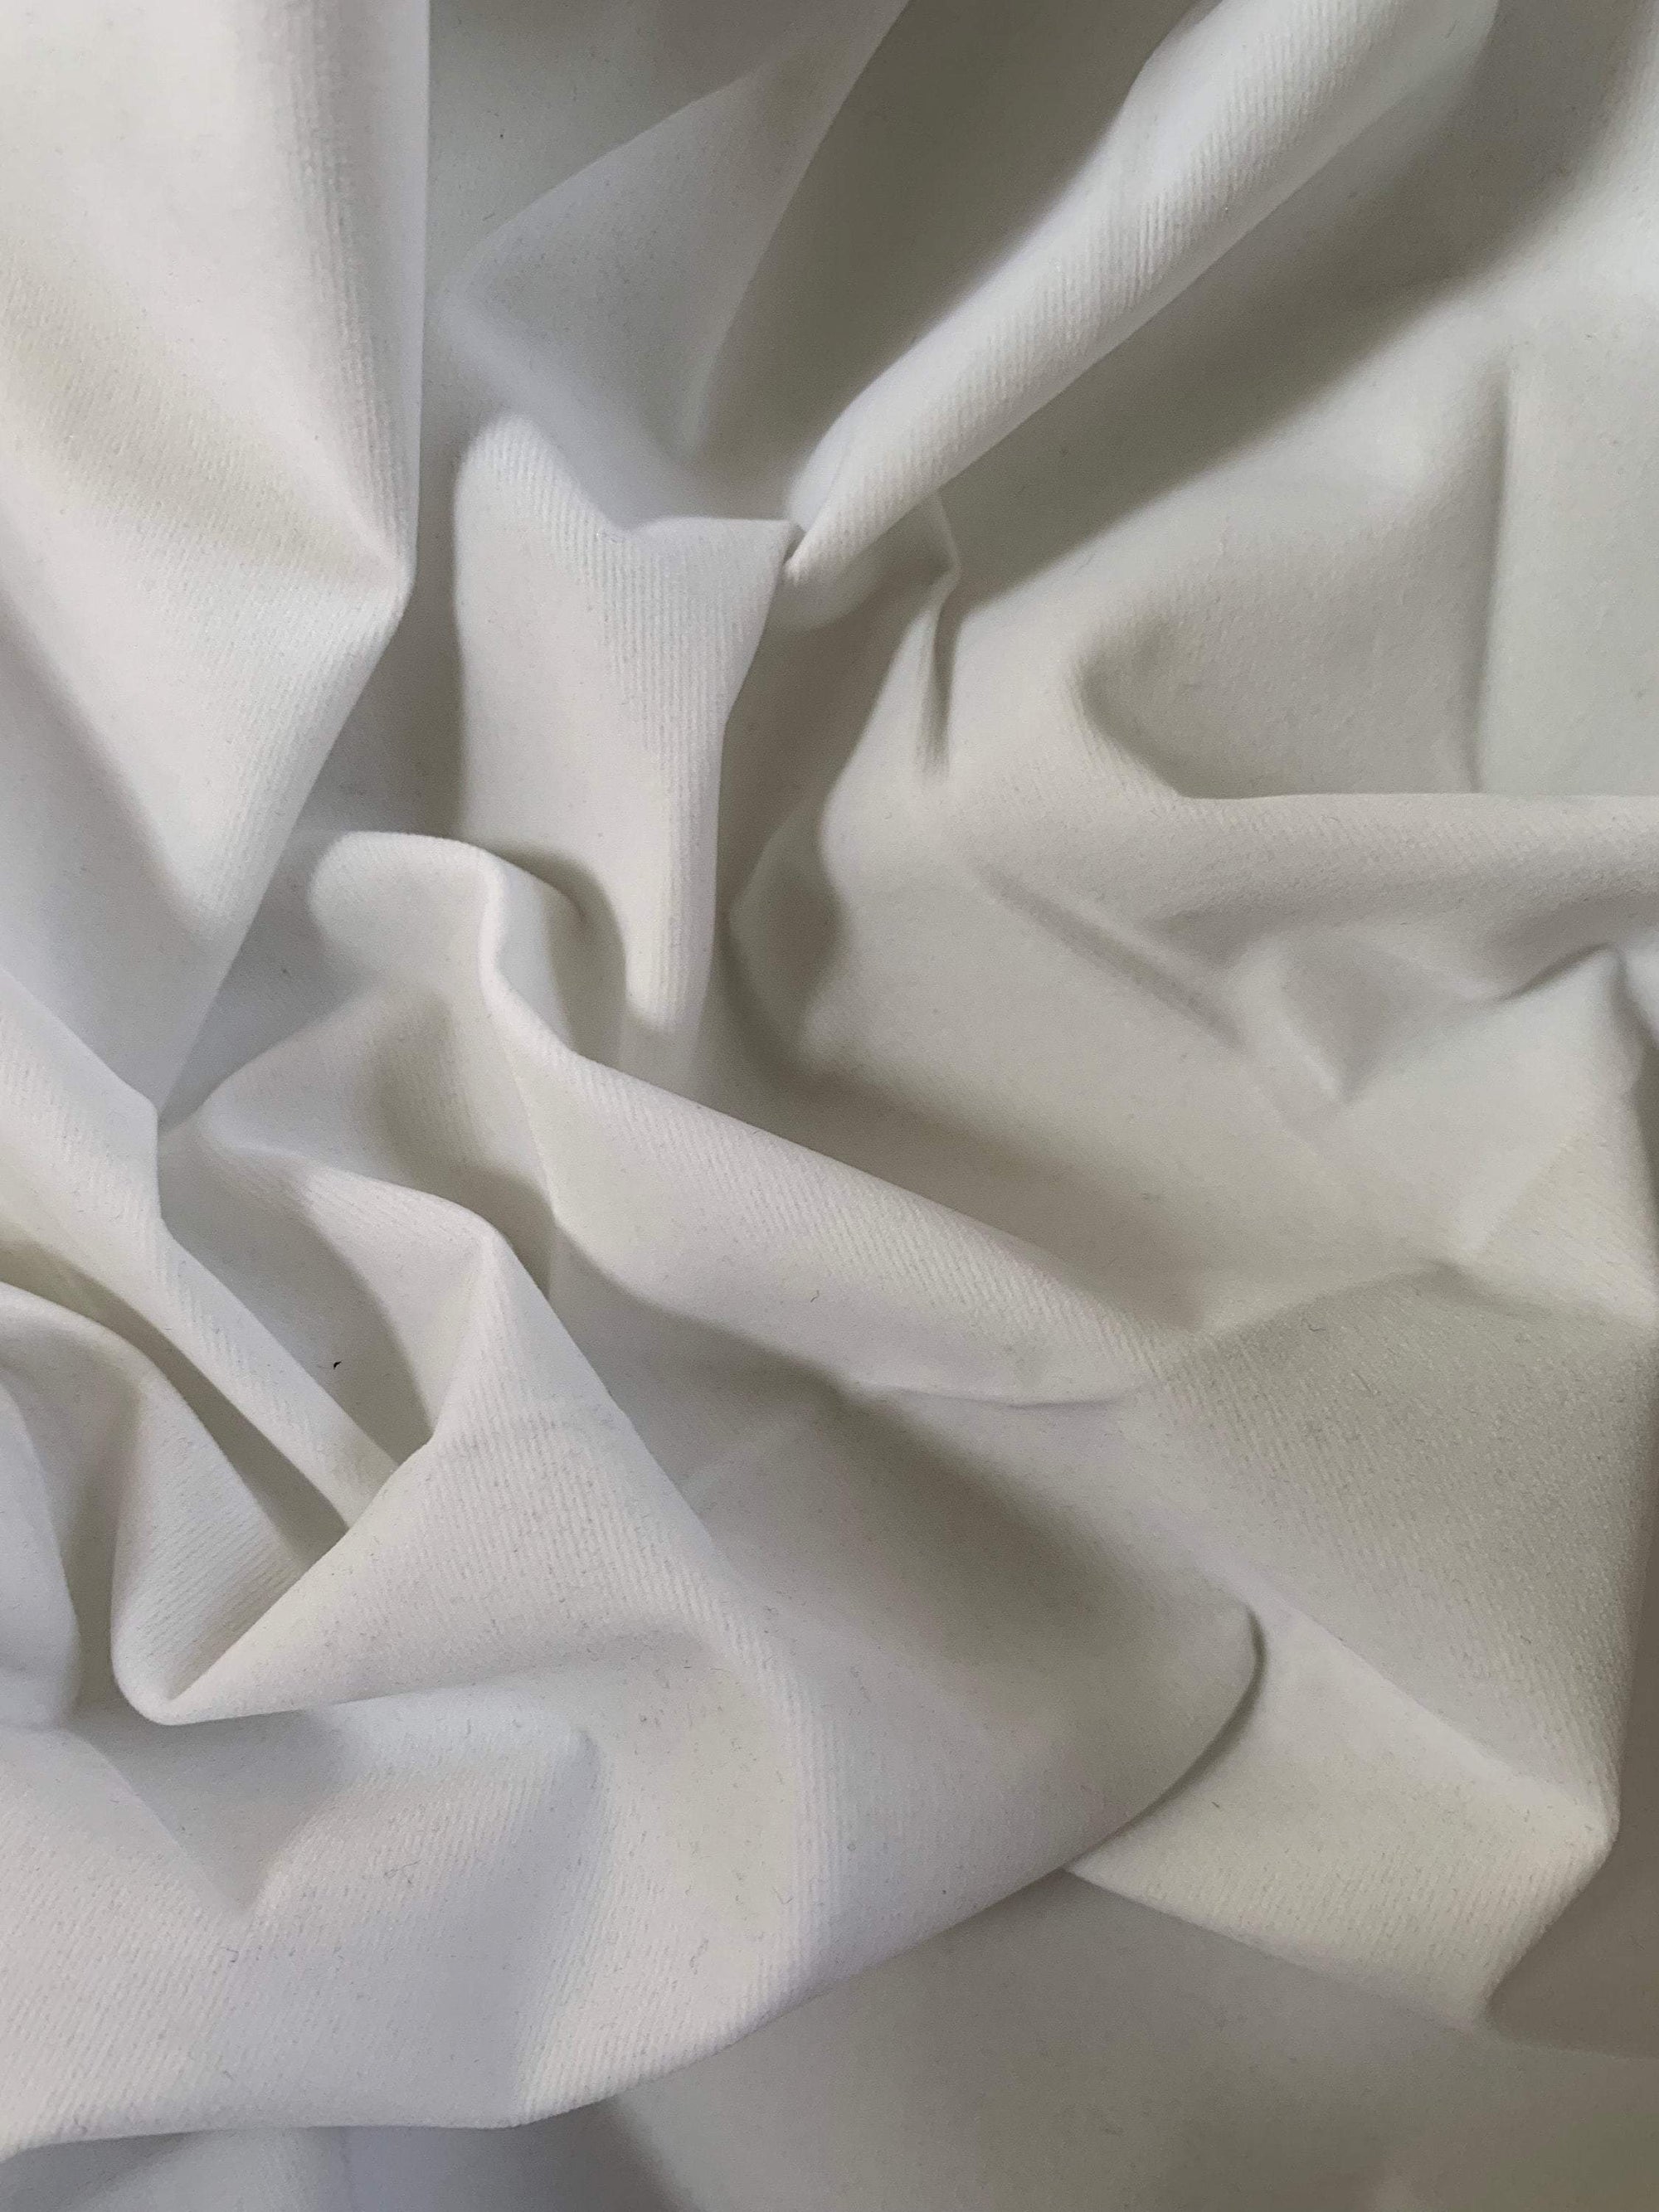 Camryn OFF WHITE Polyester Non-Stretch Velvet Fabric by the Yard for Upholstery, Book Cover, Headboard, Lining, Costumes, Crafts - 10126